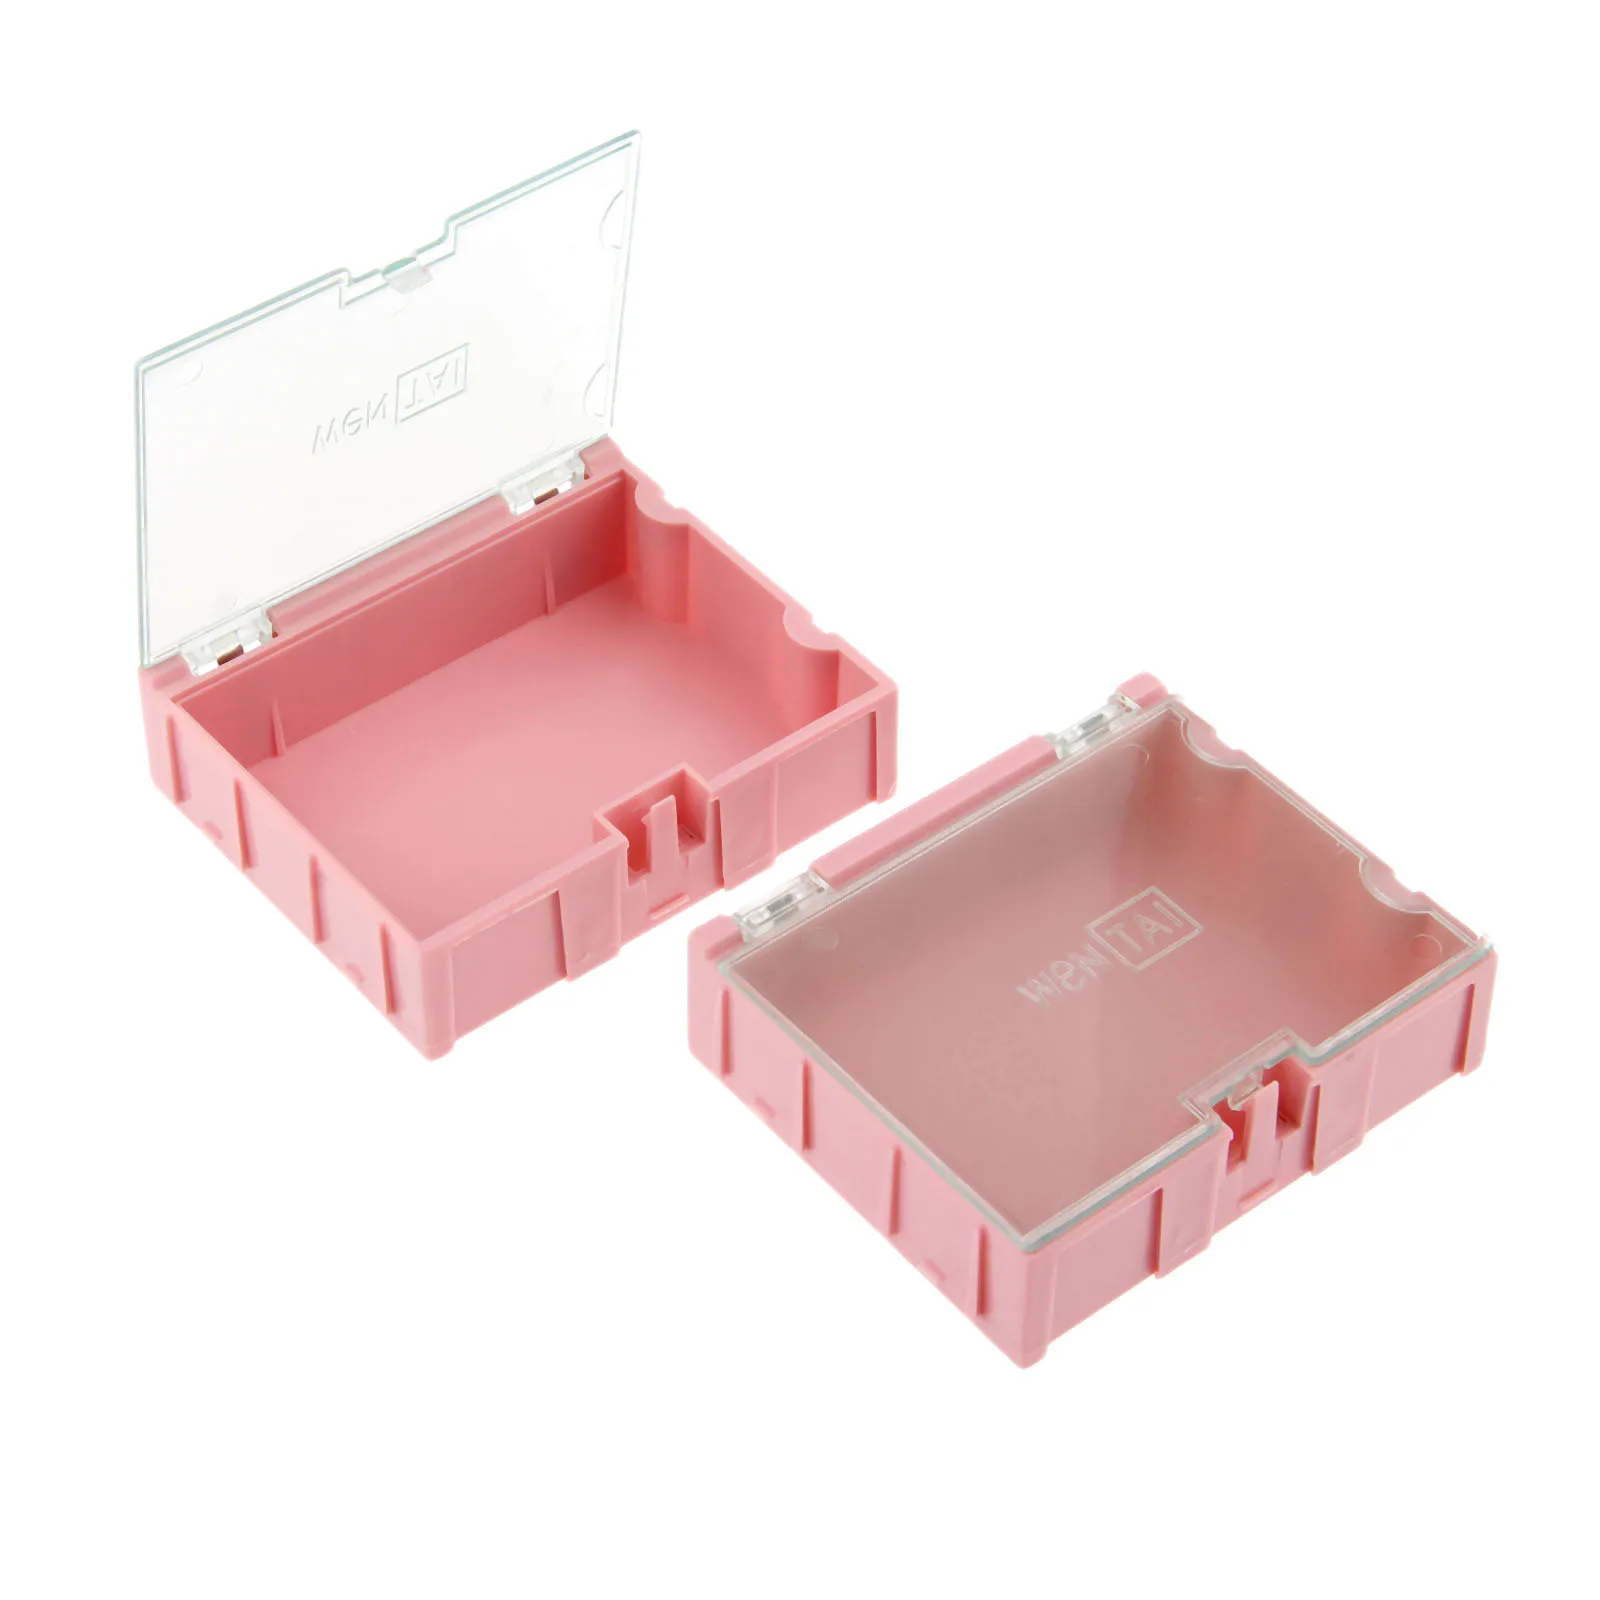 

DRELD 2Pcs SMD SMT Component Container Storage Boxes Case Plastic Jewelry Electronic Case Tool Boxes Pink 75*63*21mm